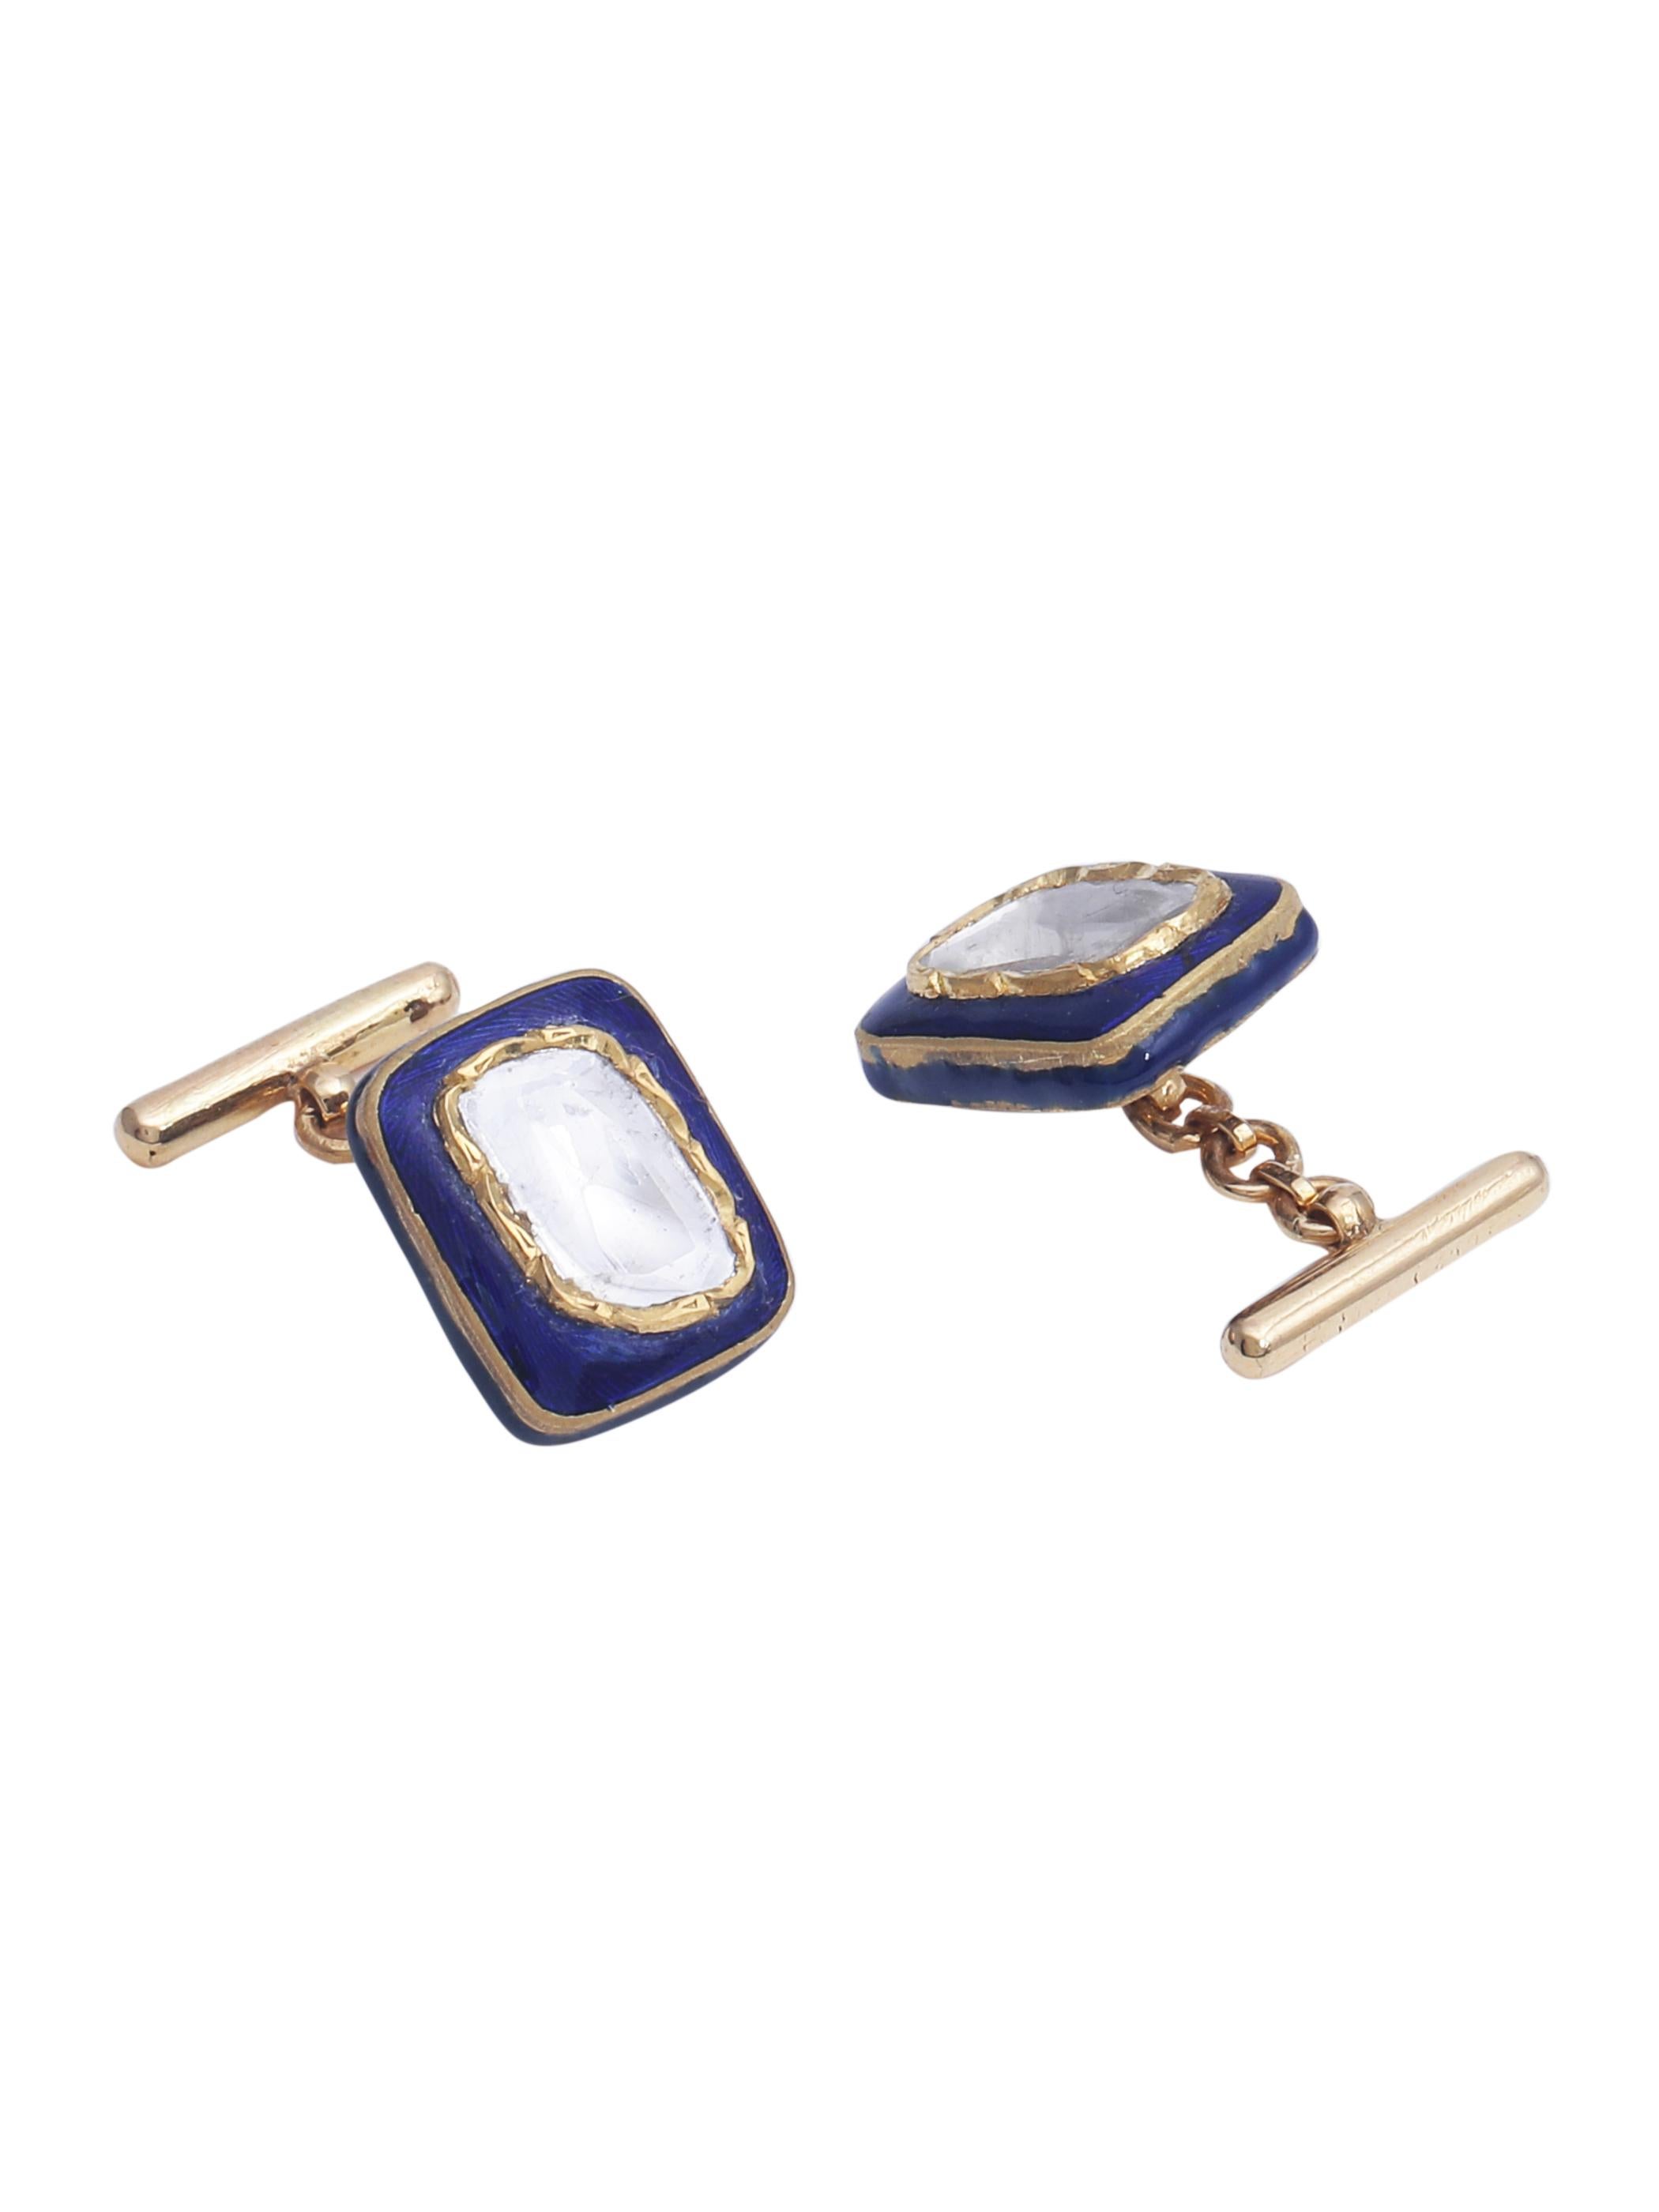 A beautiful pair of cufflinks with 1.10 carats total diamond 